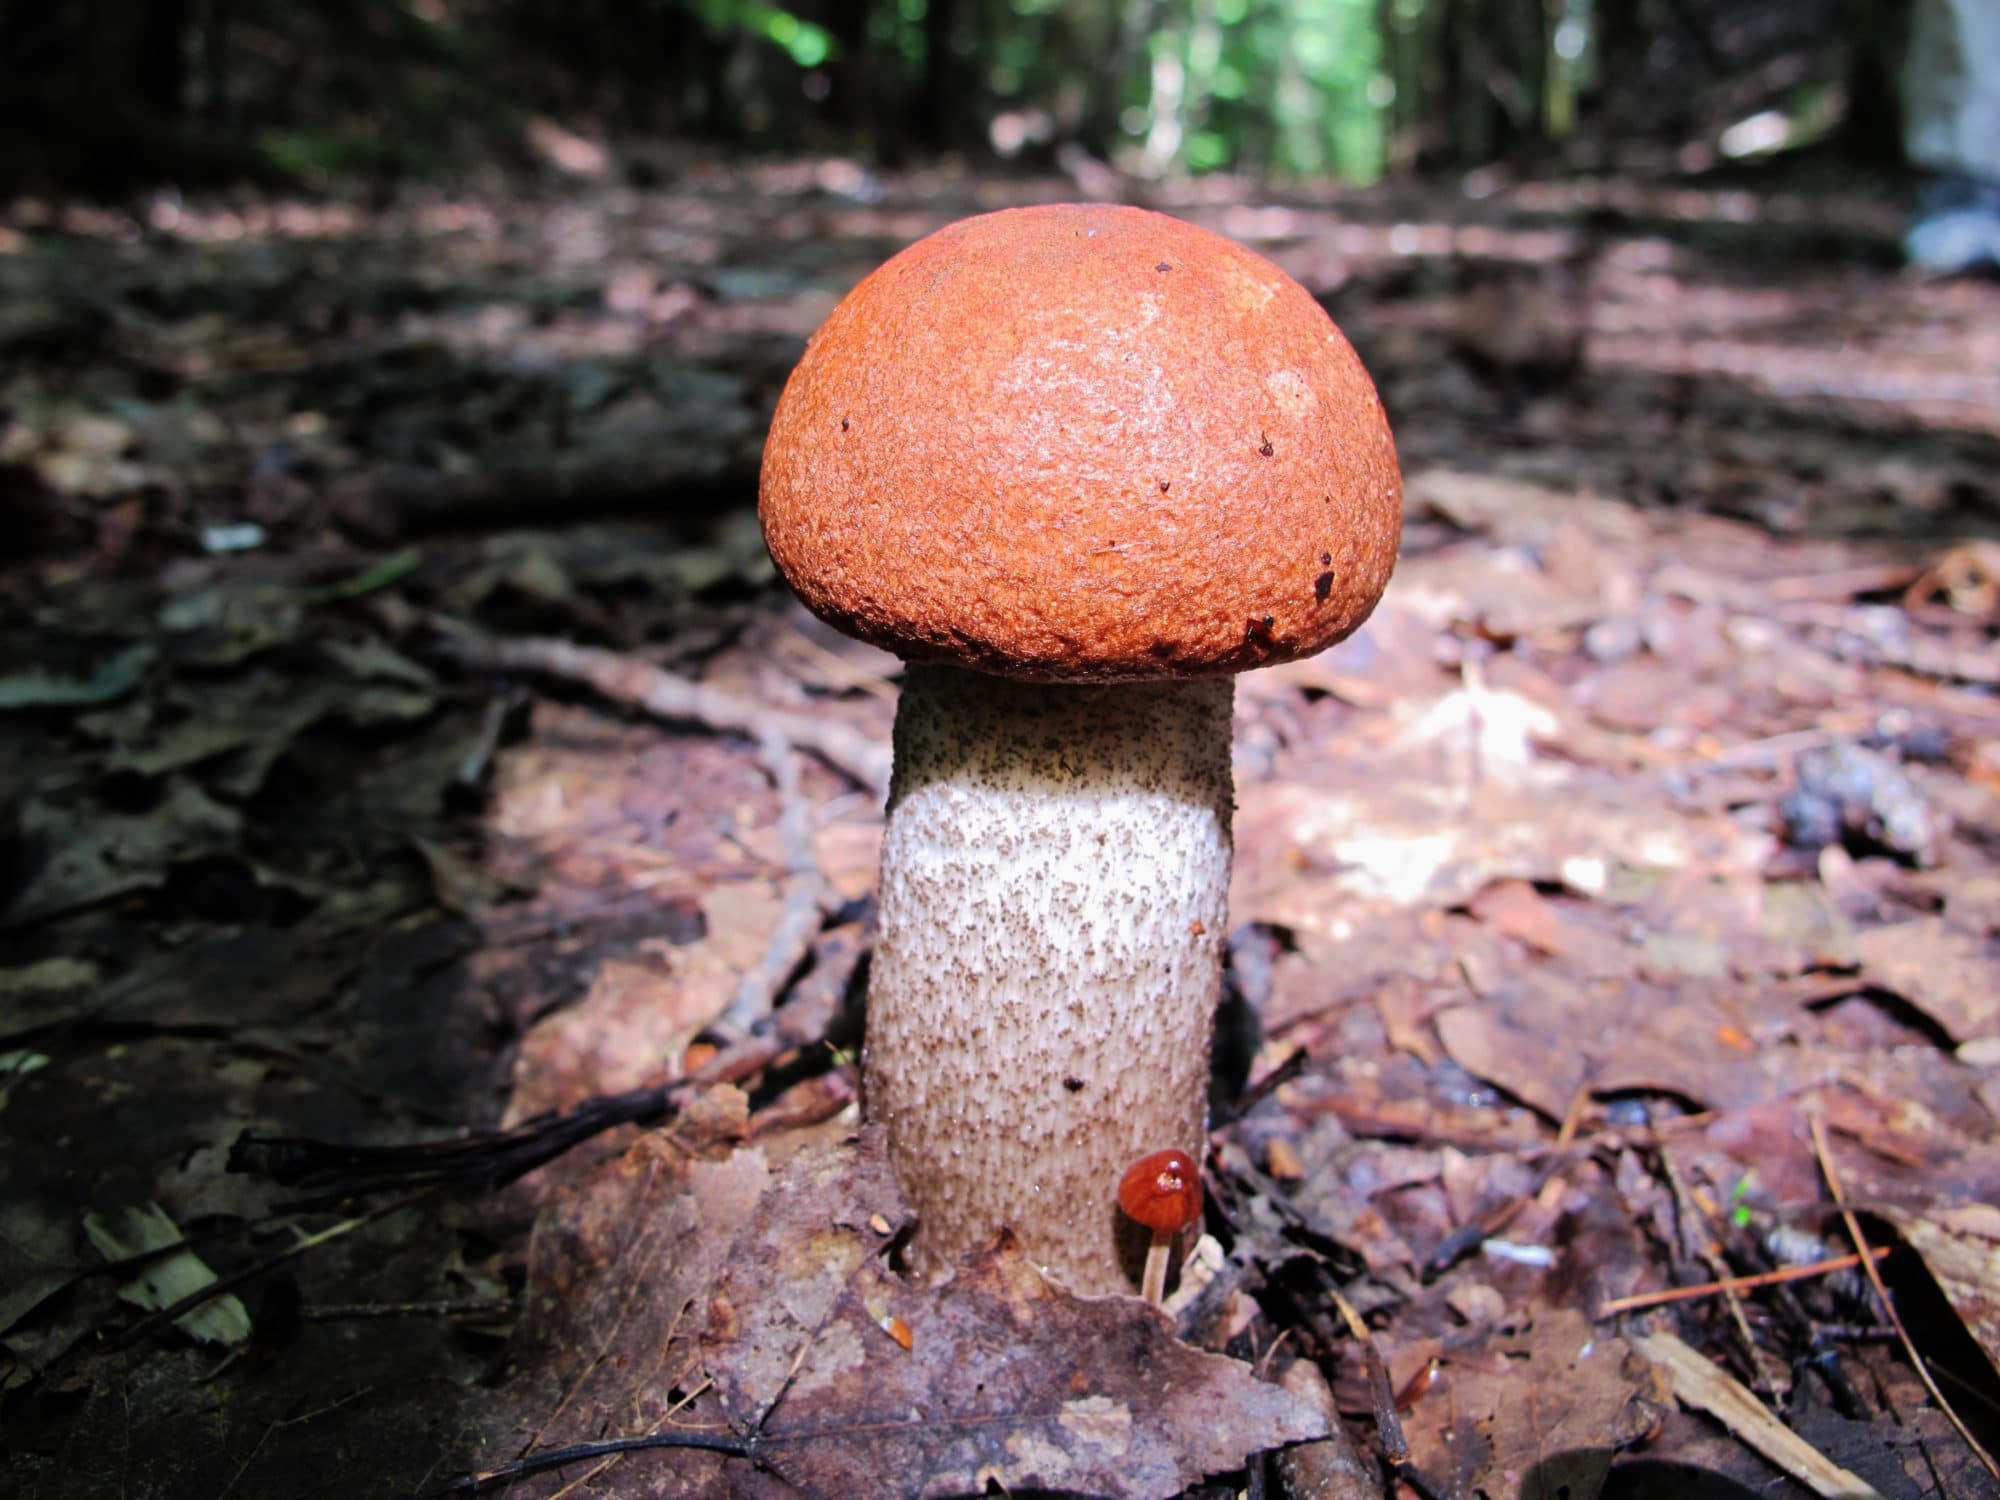 A mushroom with a brown cap and white stalk growing out of the ground. (photo © Brett Amy Thelen)